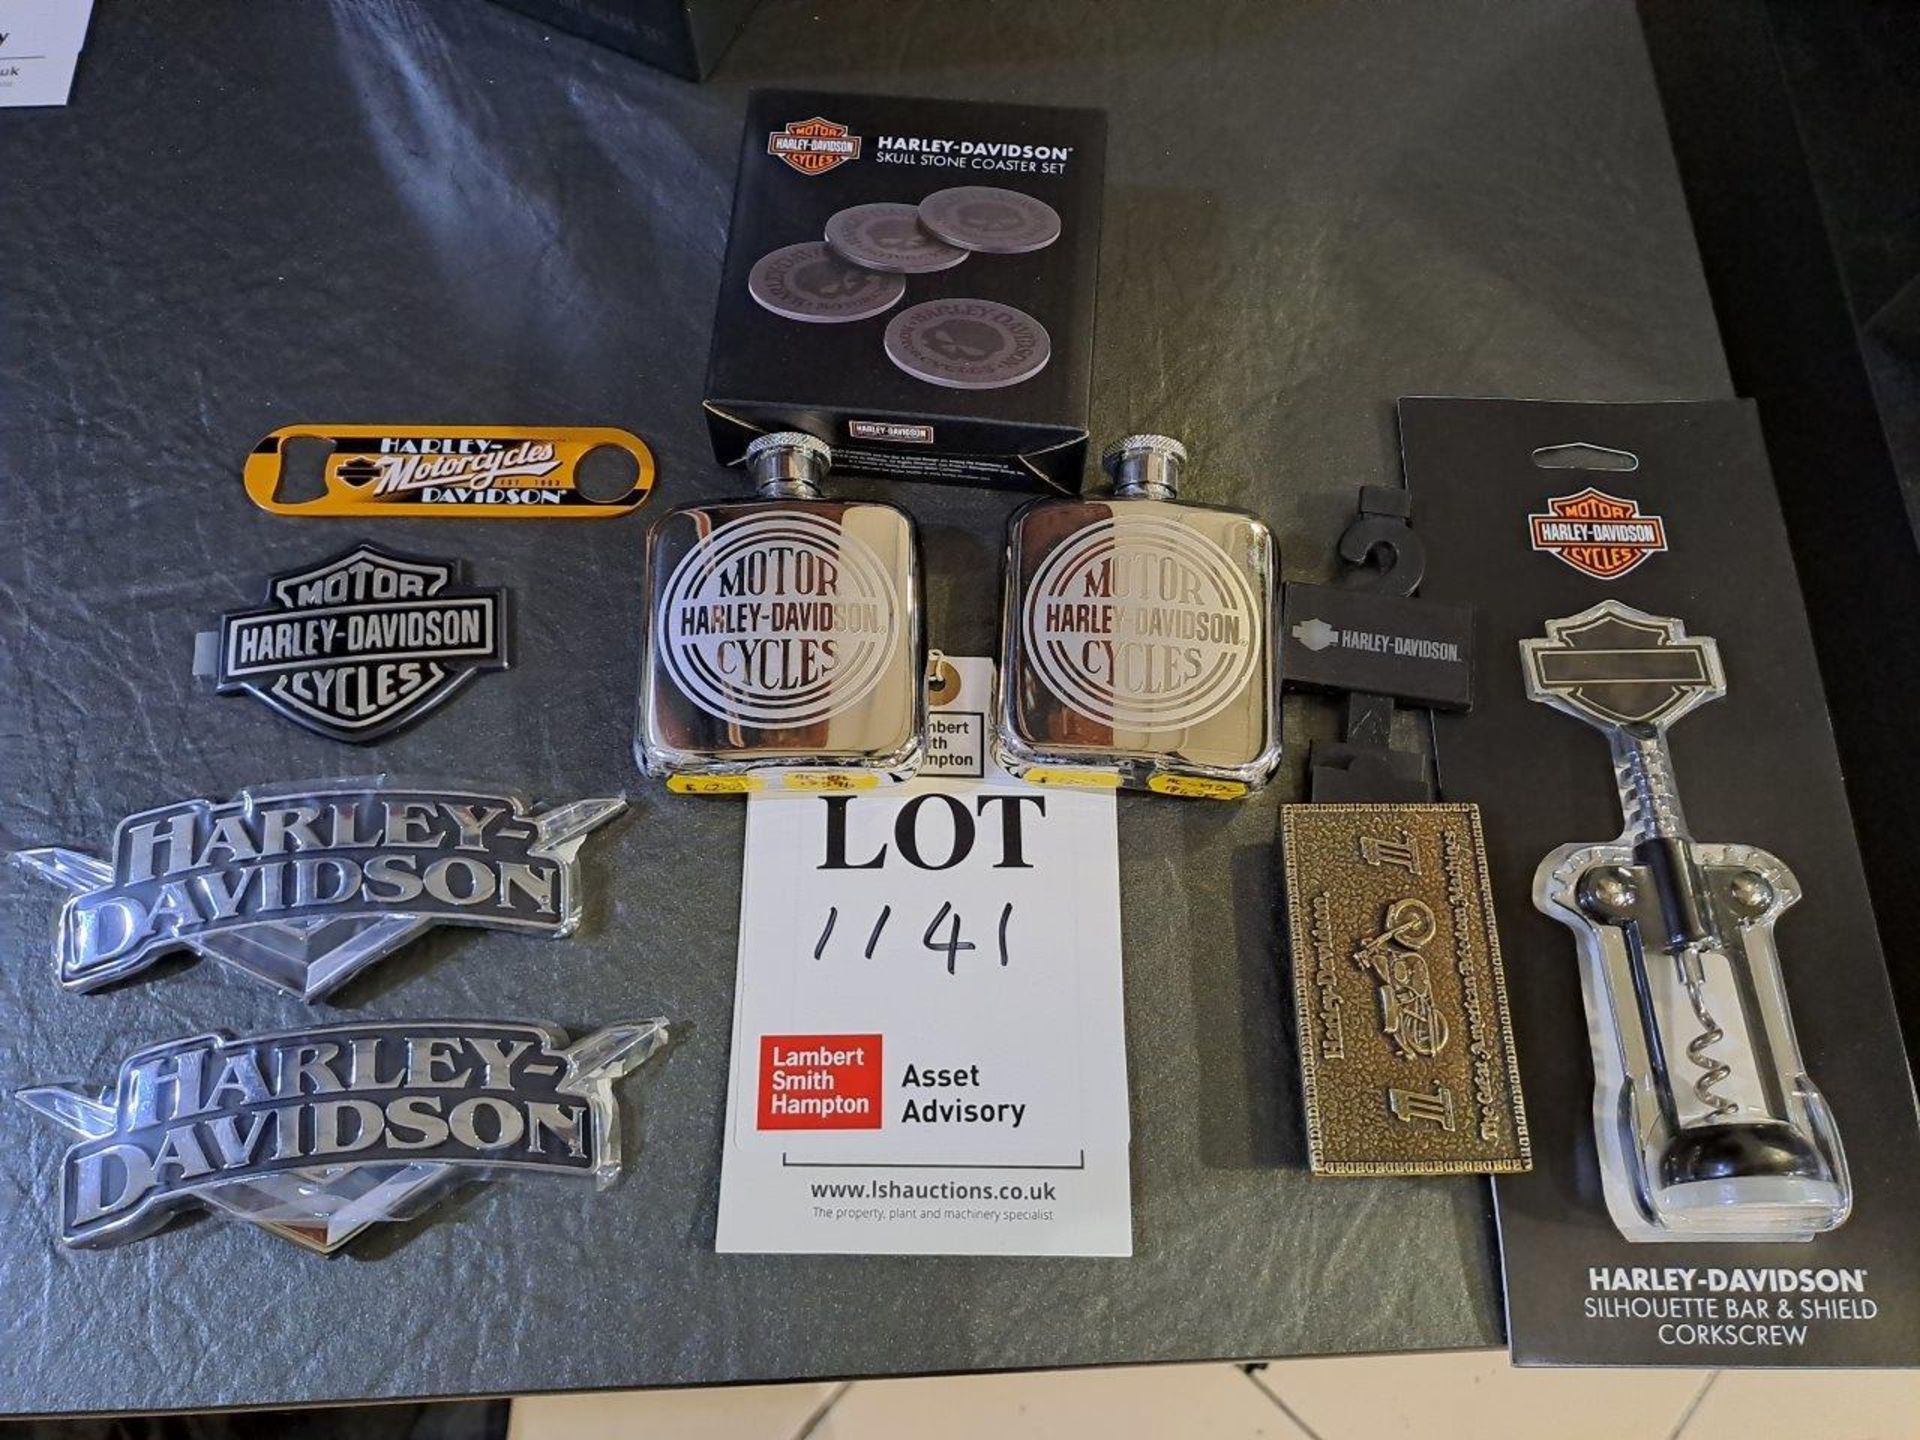 Various Harley Davidson Merchandise, as pictured